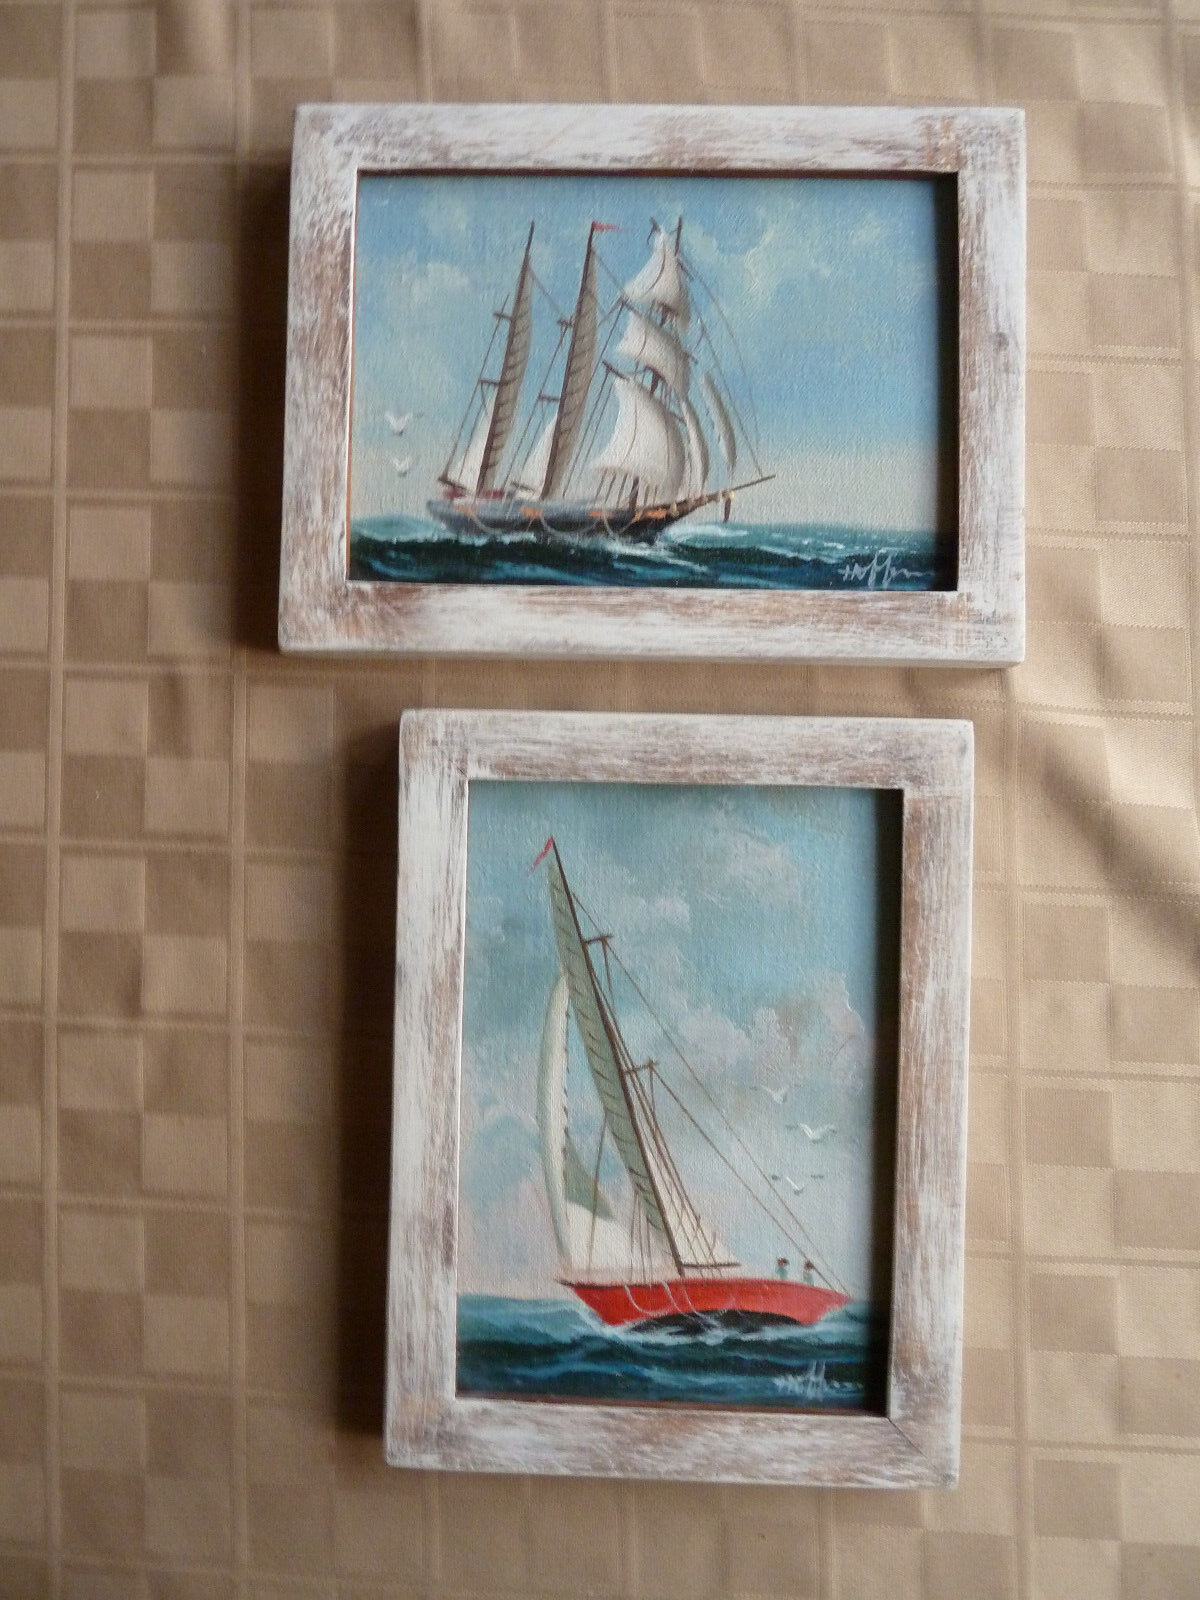 HOFFMAN FISHING SAIL BOAT ORIGINAL OIL ON CANVAS SEASCAPE SMALL PAINTINGS